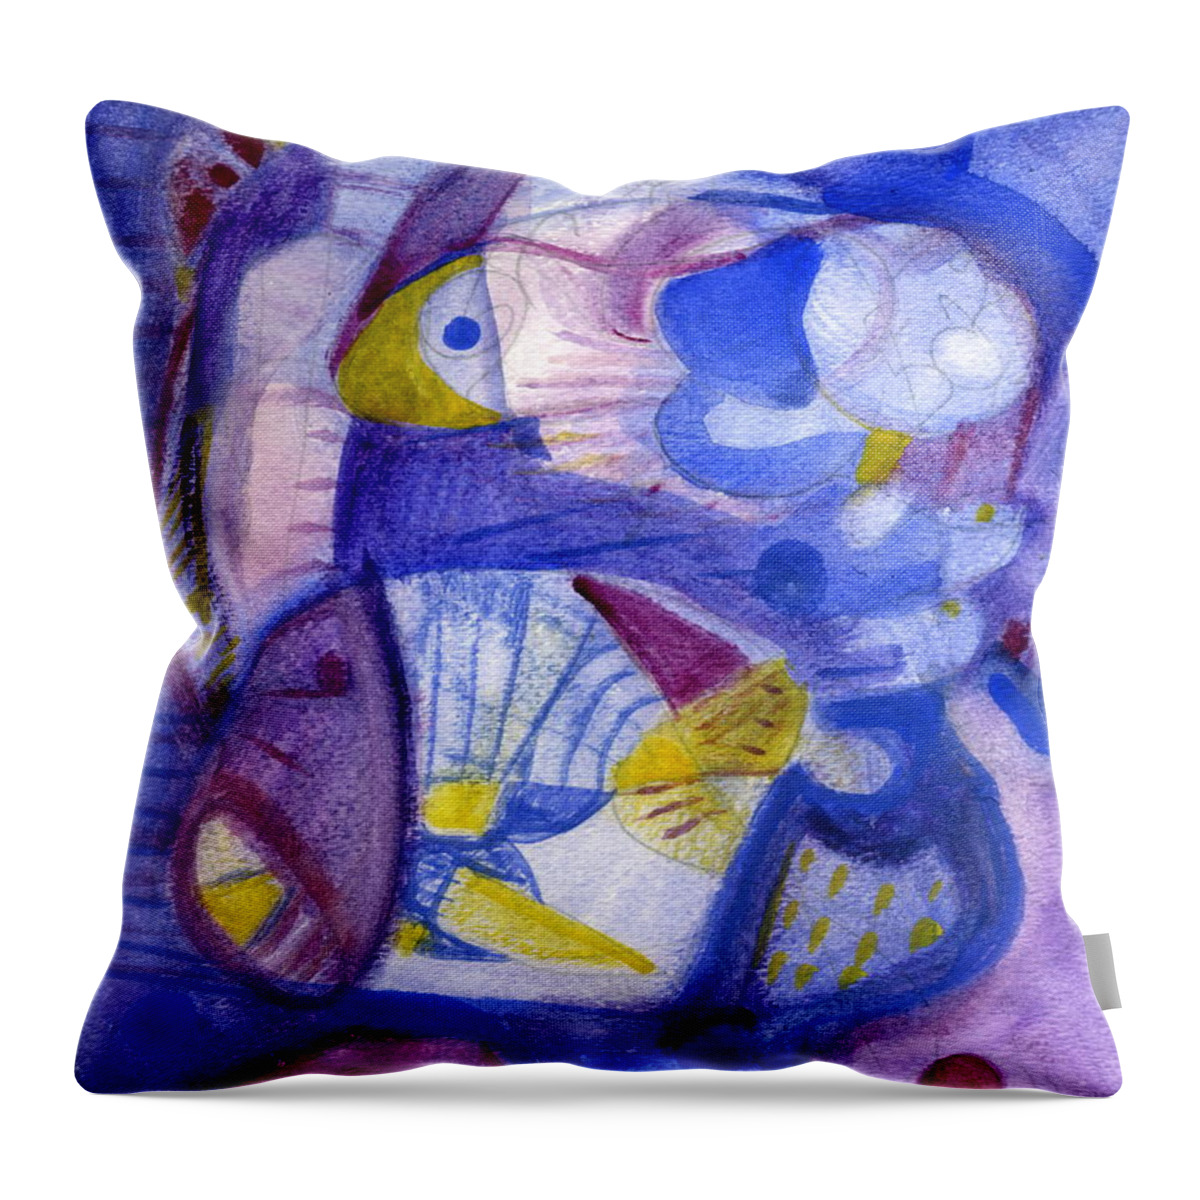 Abstract Art Throw Pillow featuring the painting Sea Life by Stephen Lucas